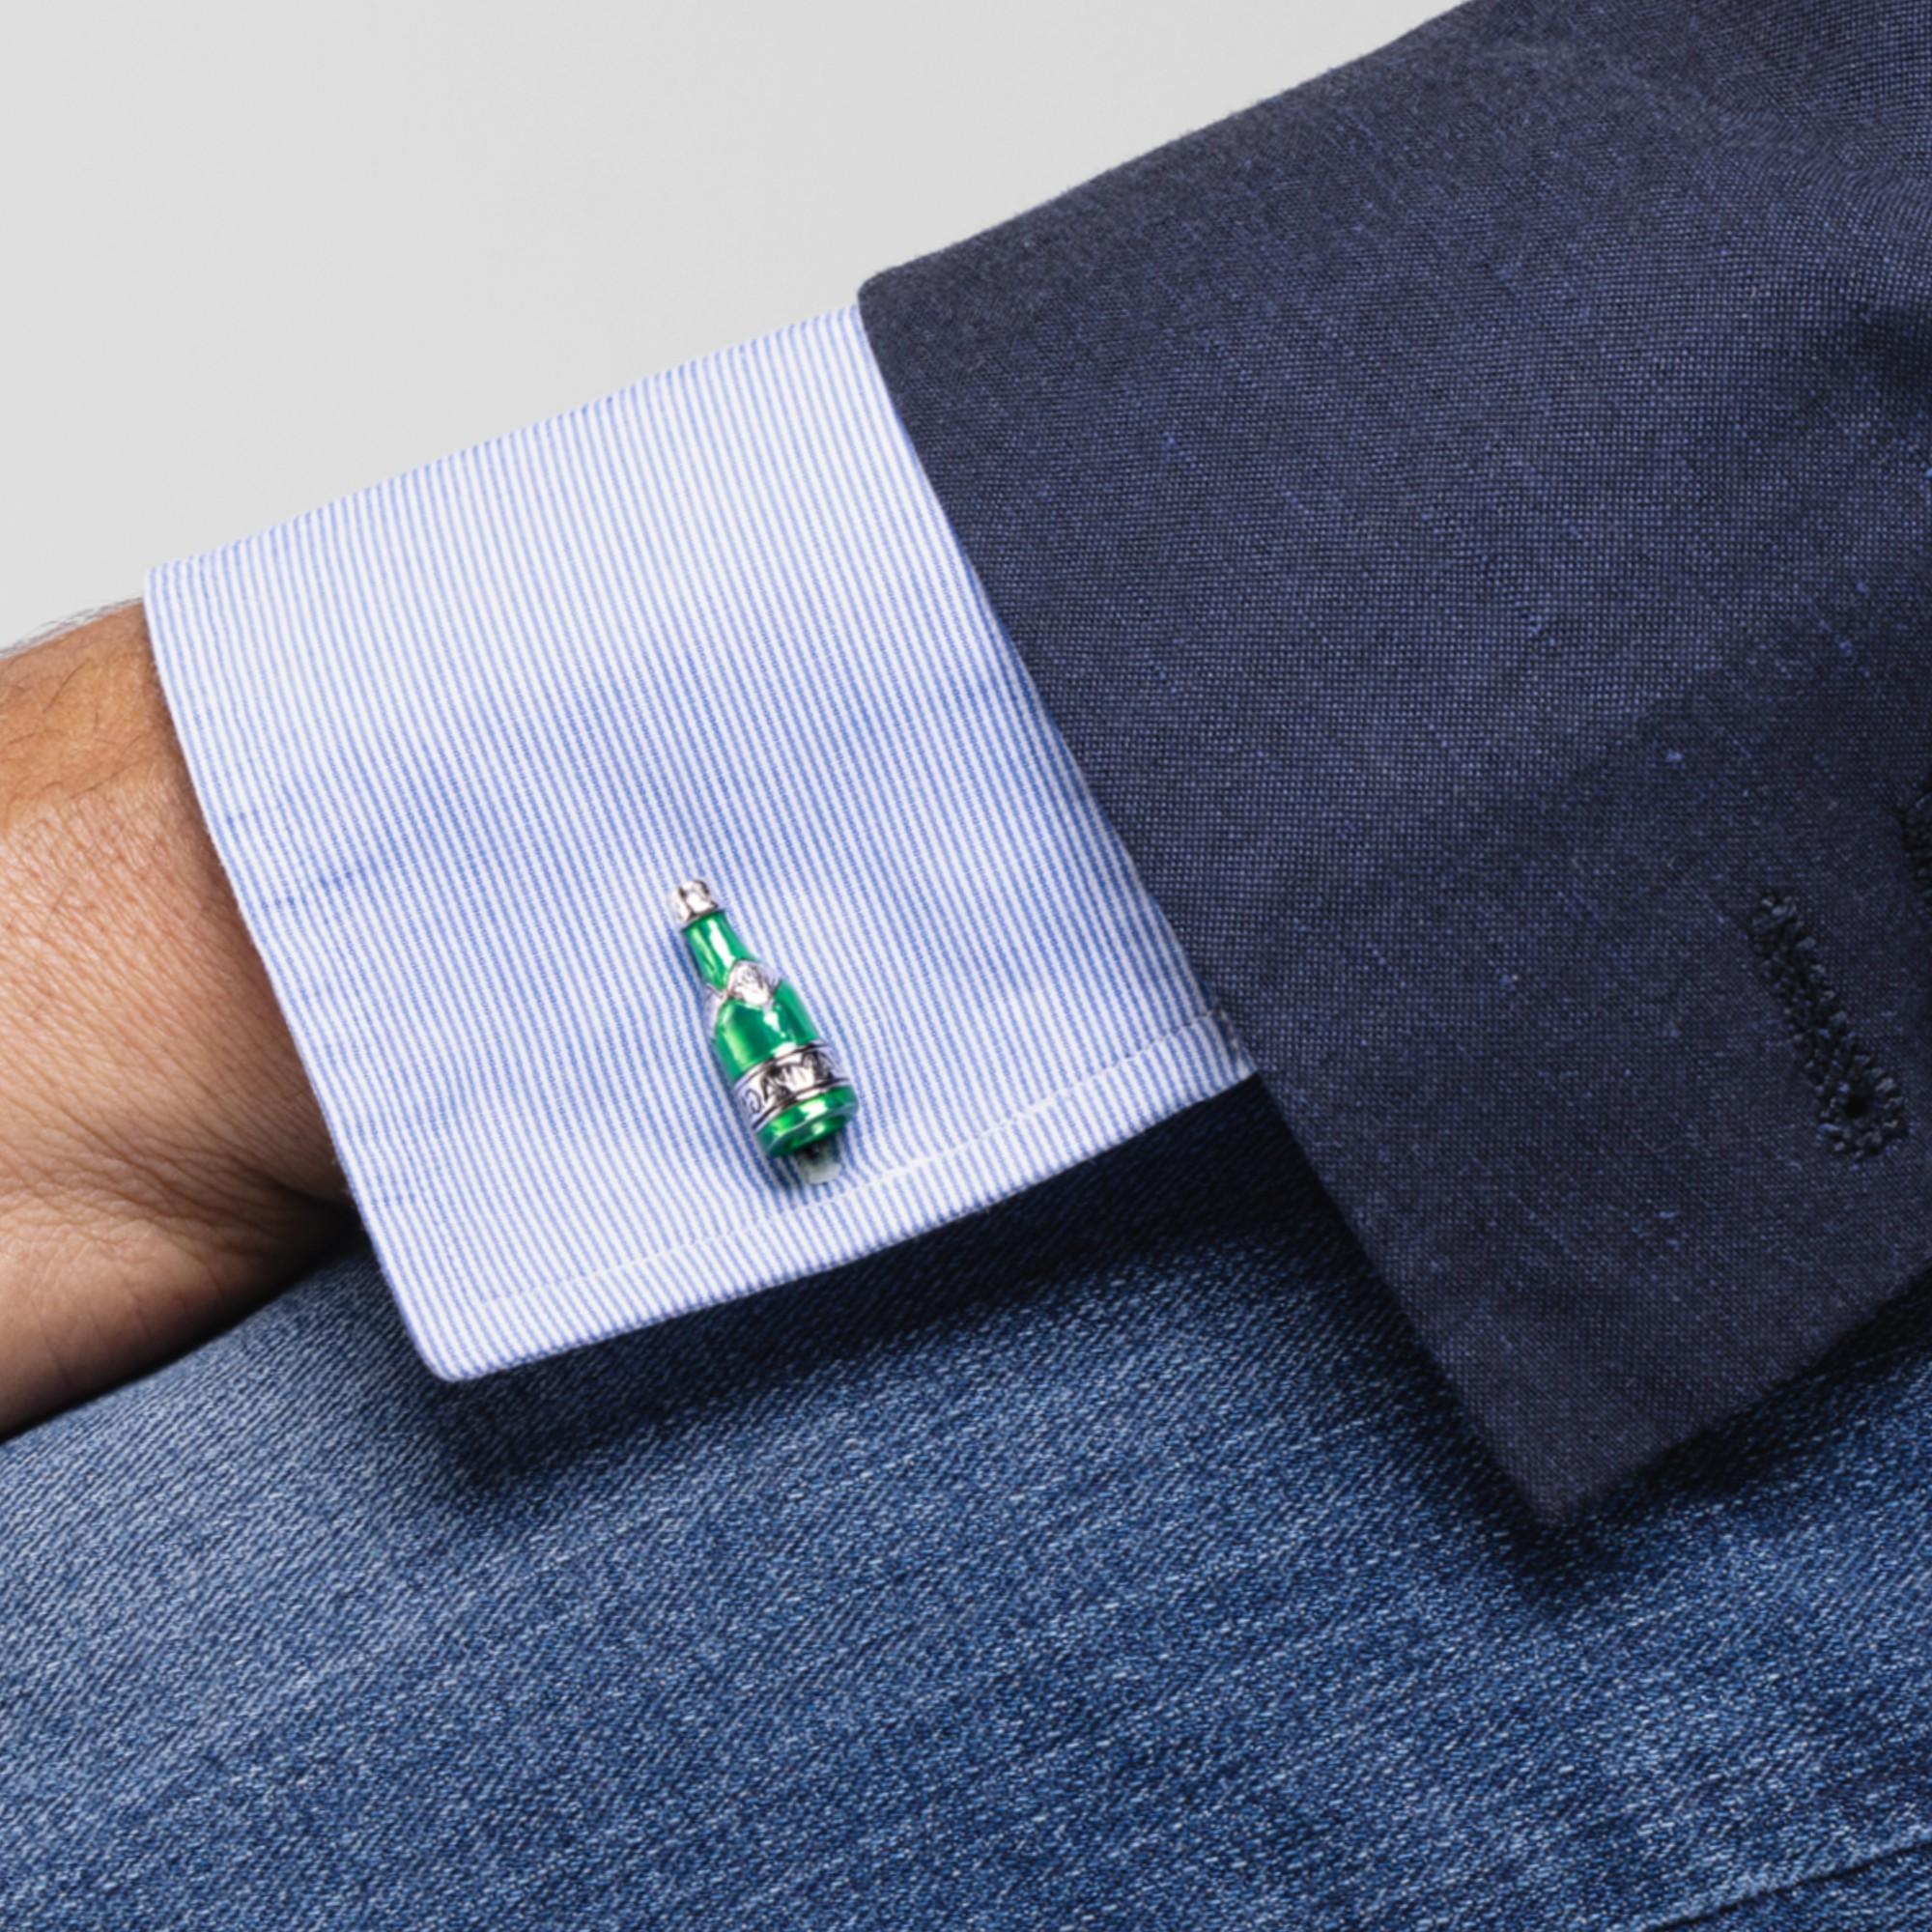 Celebrate with Alex Jona champagne bottle cufflinks!
These sophisticated double champagne bottle cufflinks are perfect for special occasions. They have been designed by Alex Jona, hand crafted in Italy in sterling silver with green enamel.
Alex Jona